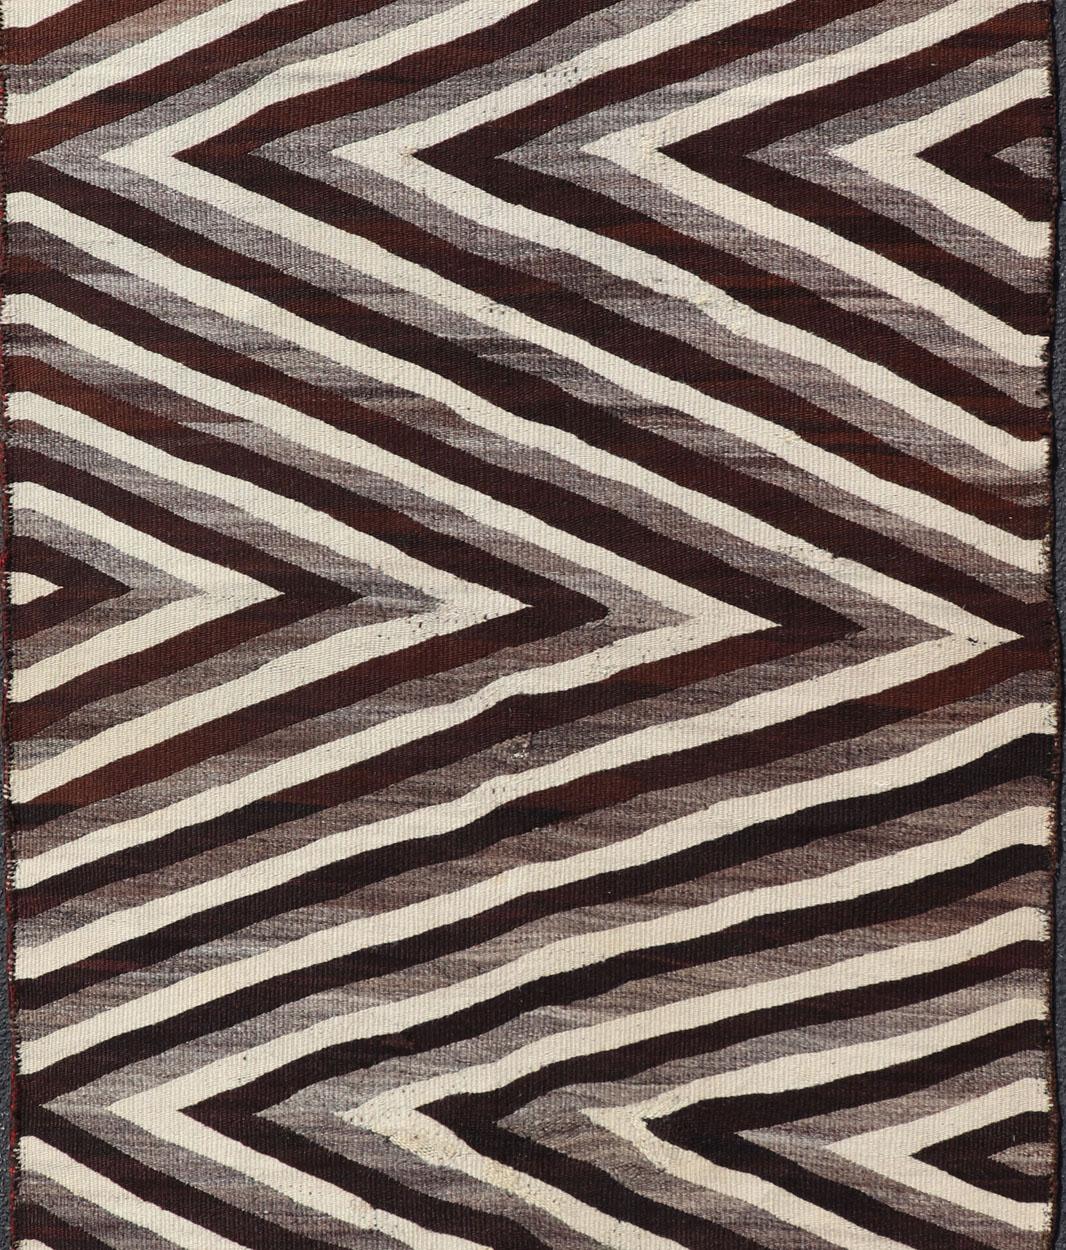 Large Early Navajo Tribal Rug with Large Zig-Zag Design in Brown, Ivory For Sale 1